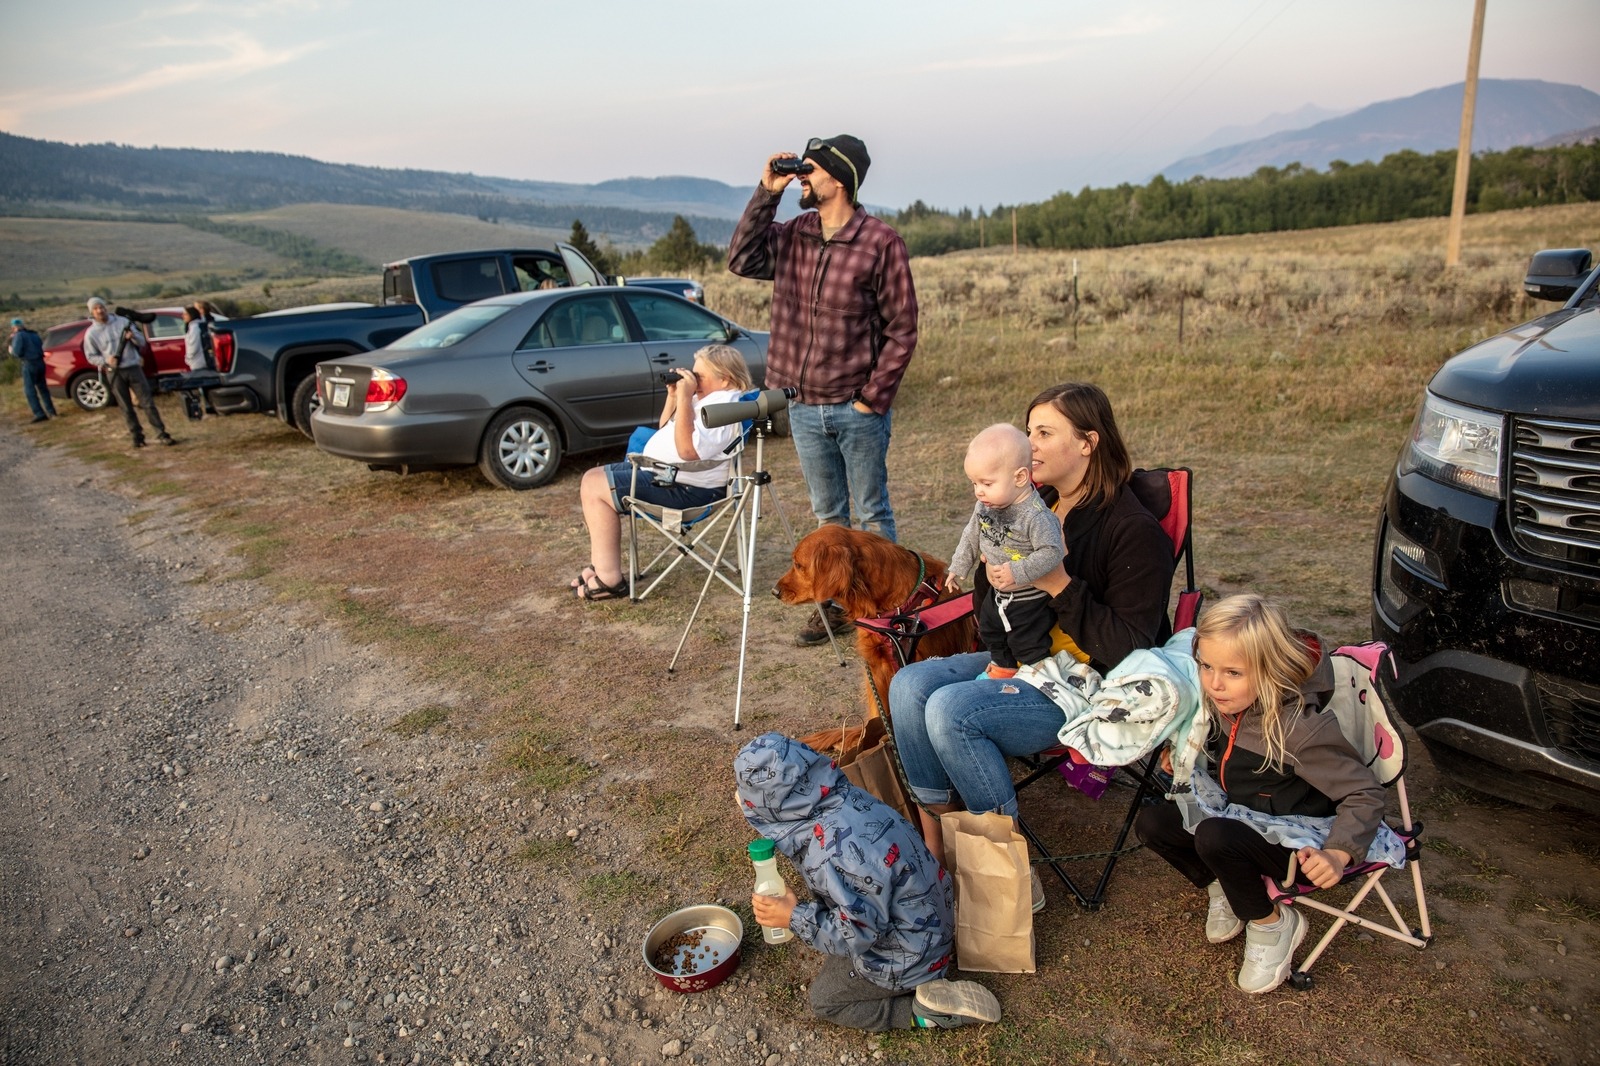 Holly and Charley May sit with their three children and dog, Maverick, on the side of the Tom Miner Basin county road watching grizzly bears in the distance in September, 2022. The Mays are from Livingston, Montana, and for six years they’ve kept an annual tradition to see the bears each fall.